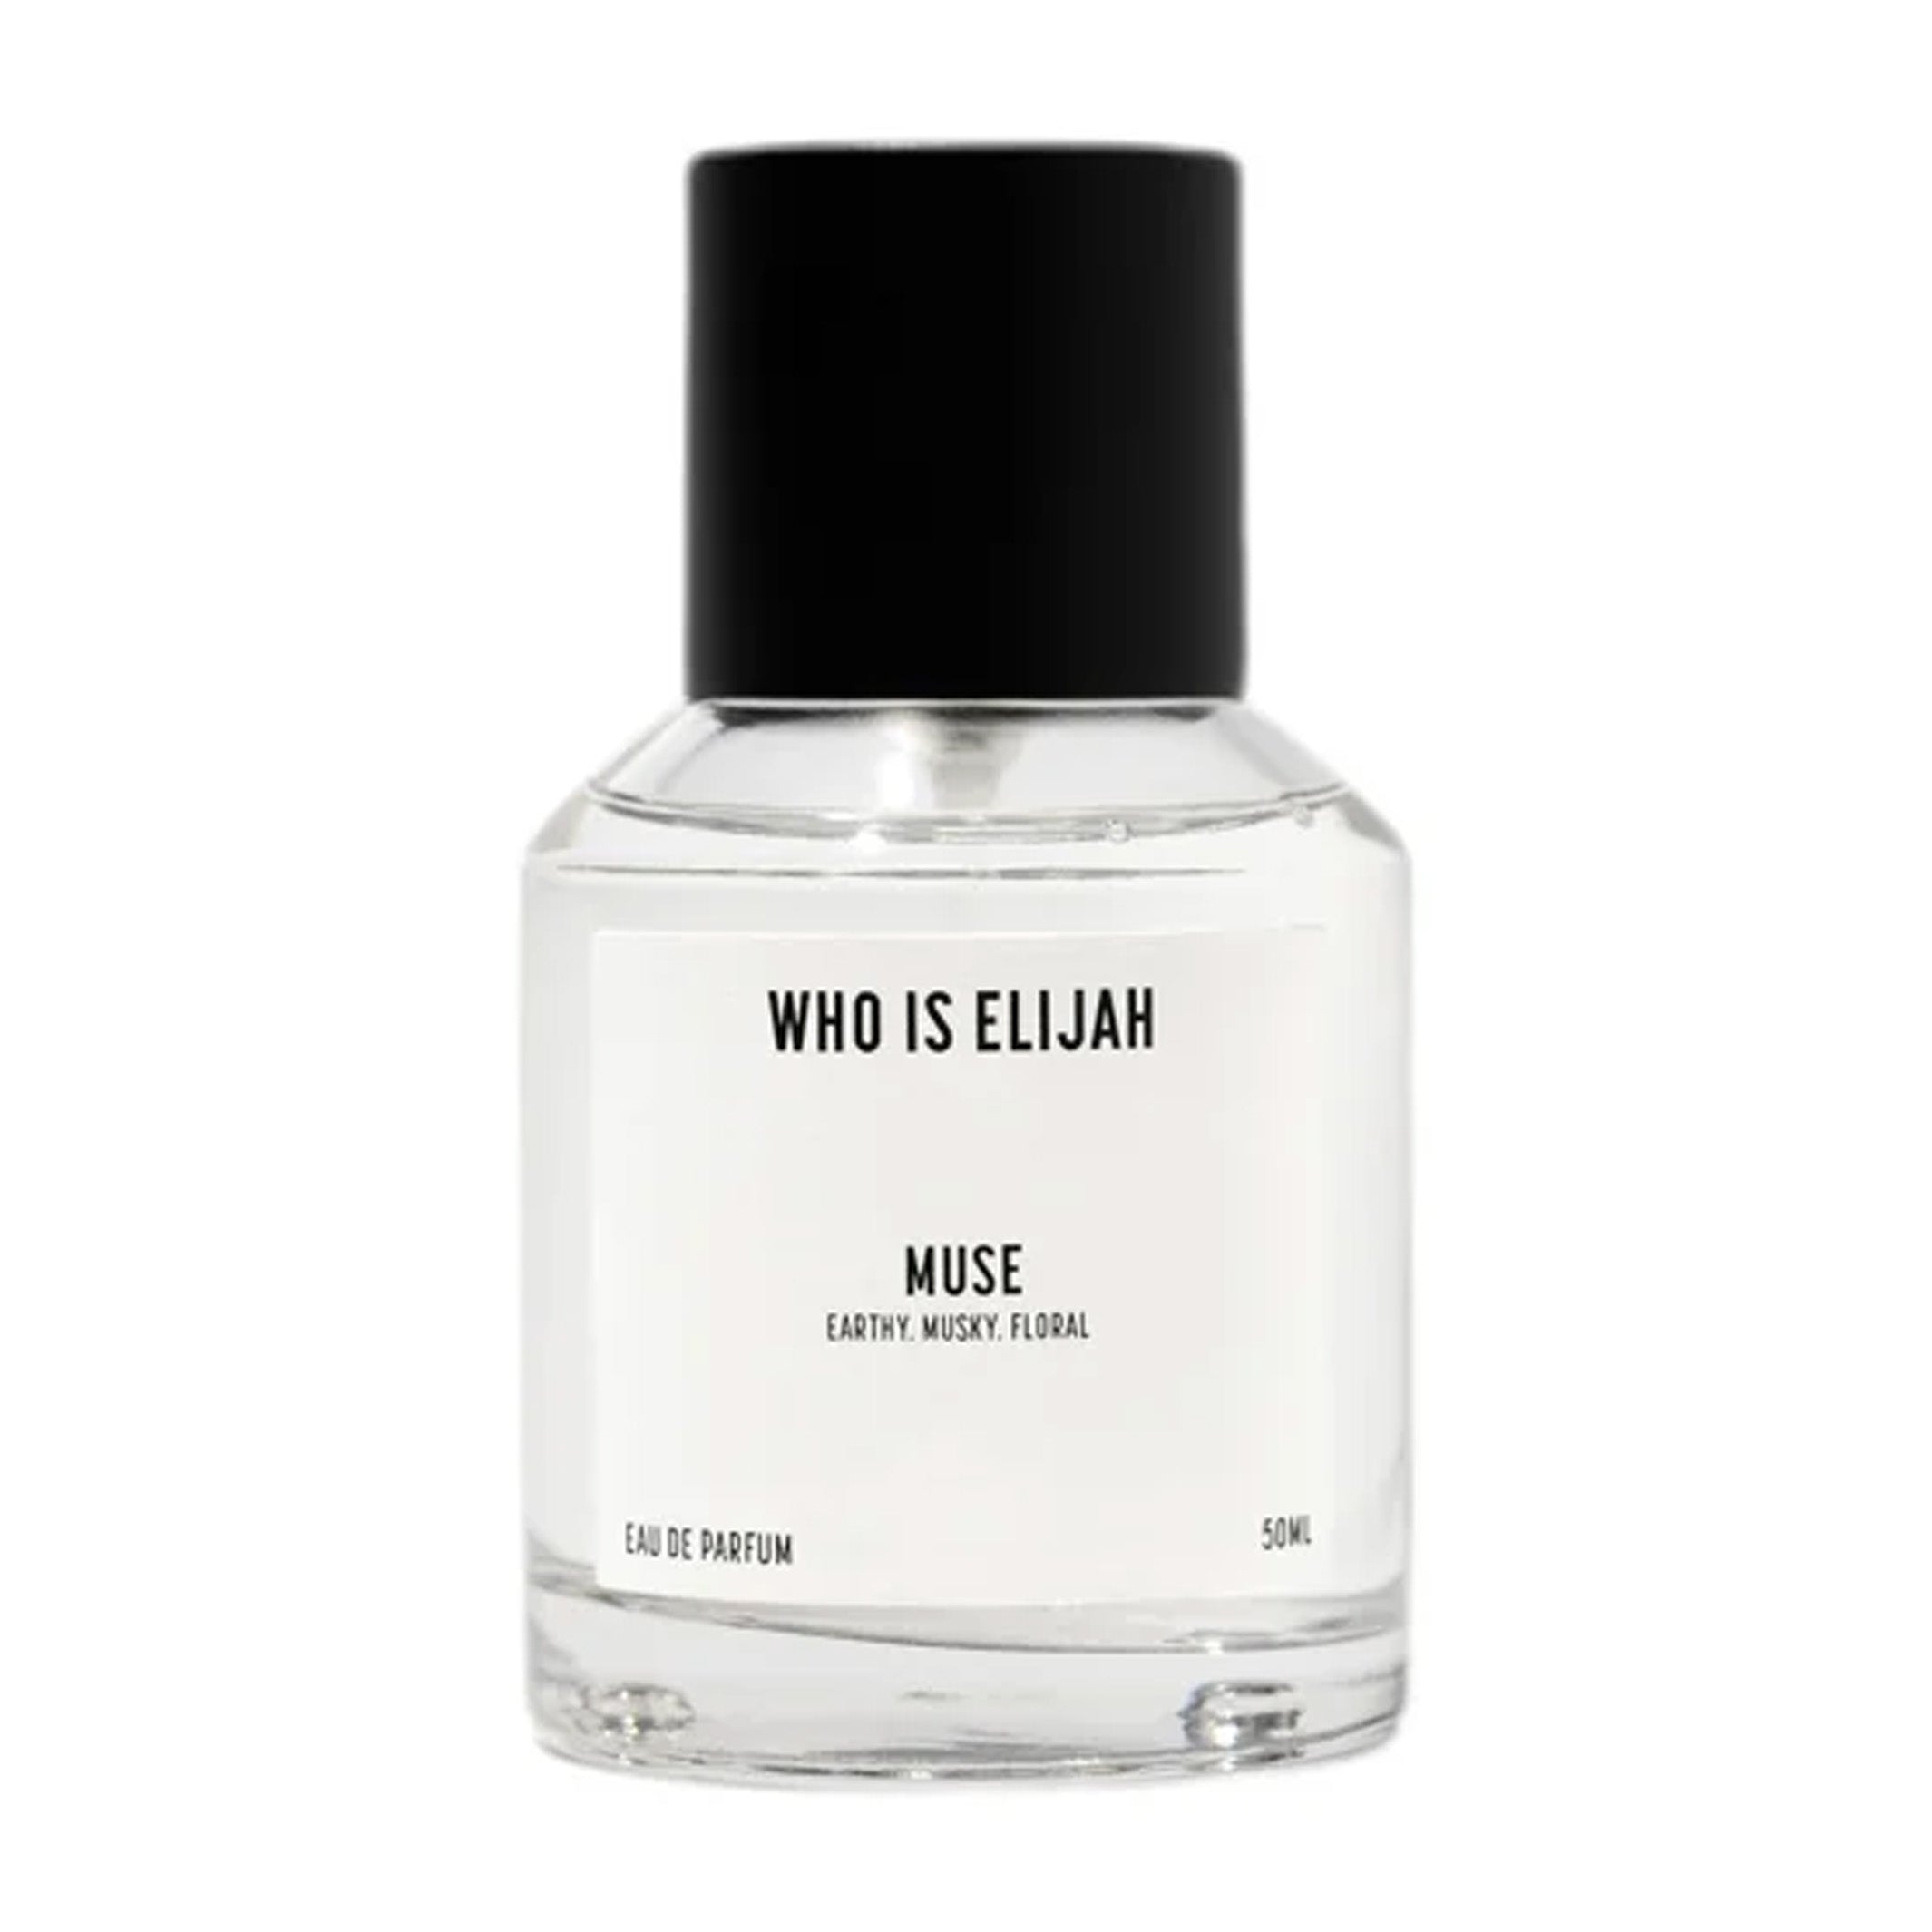 who is elijah MUSE 50ml